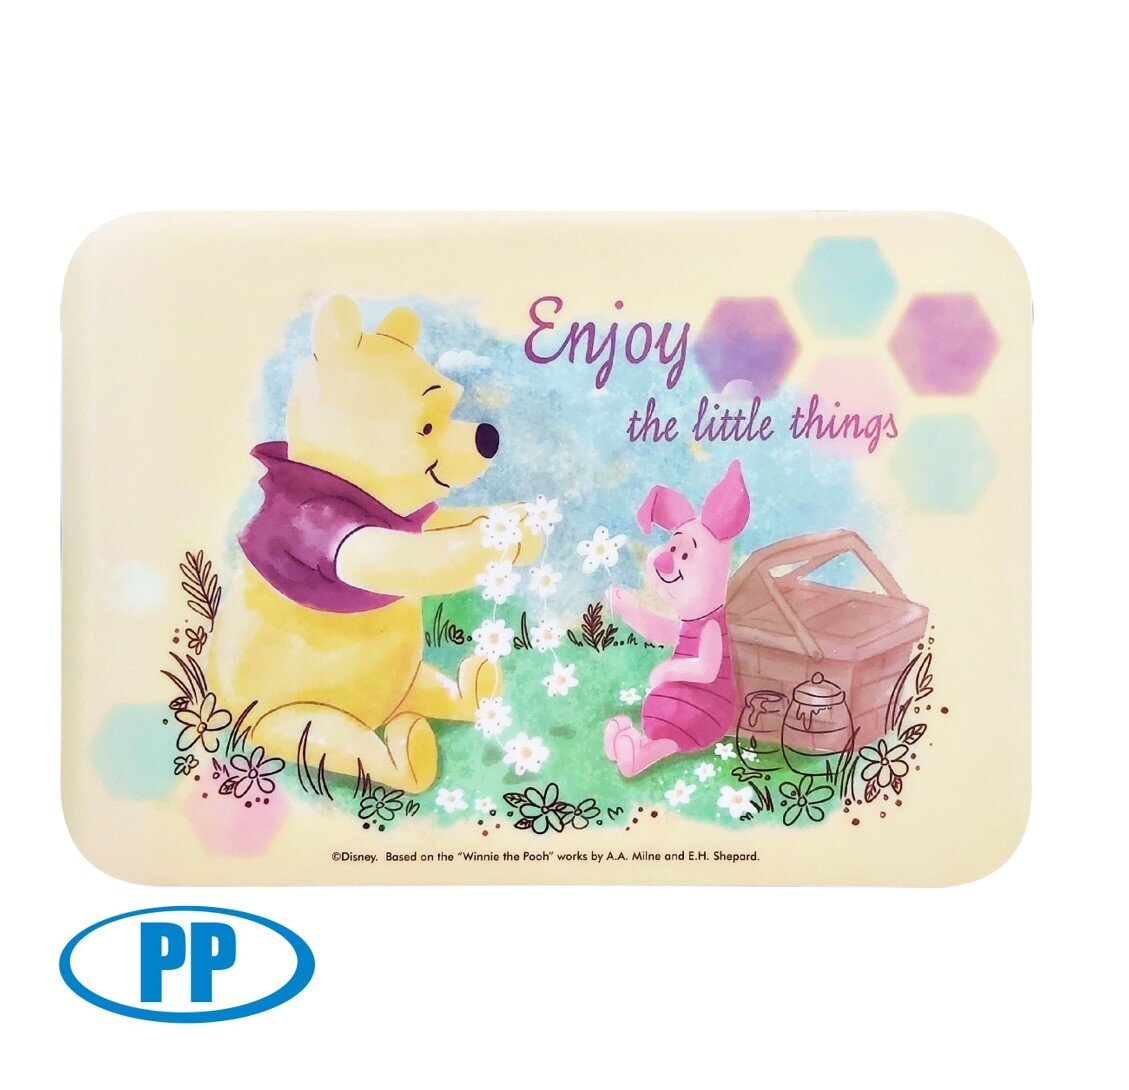 PP Placemat(Licensed by Disney)